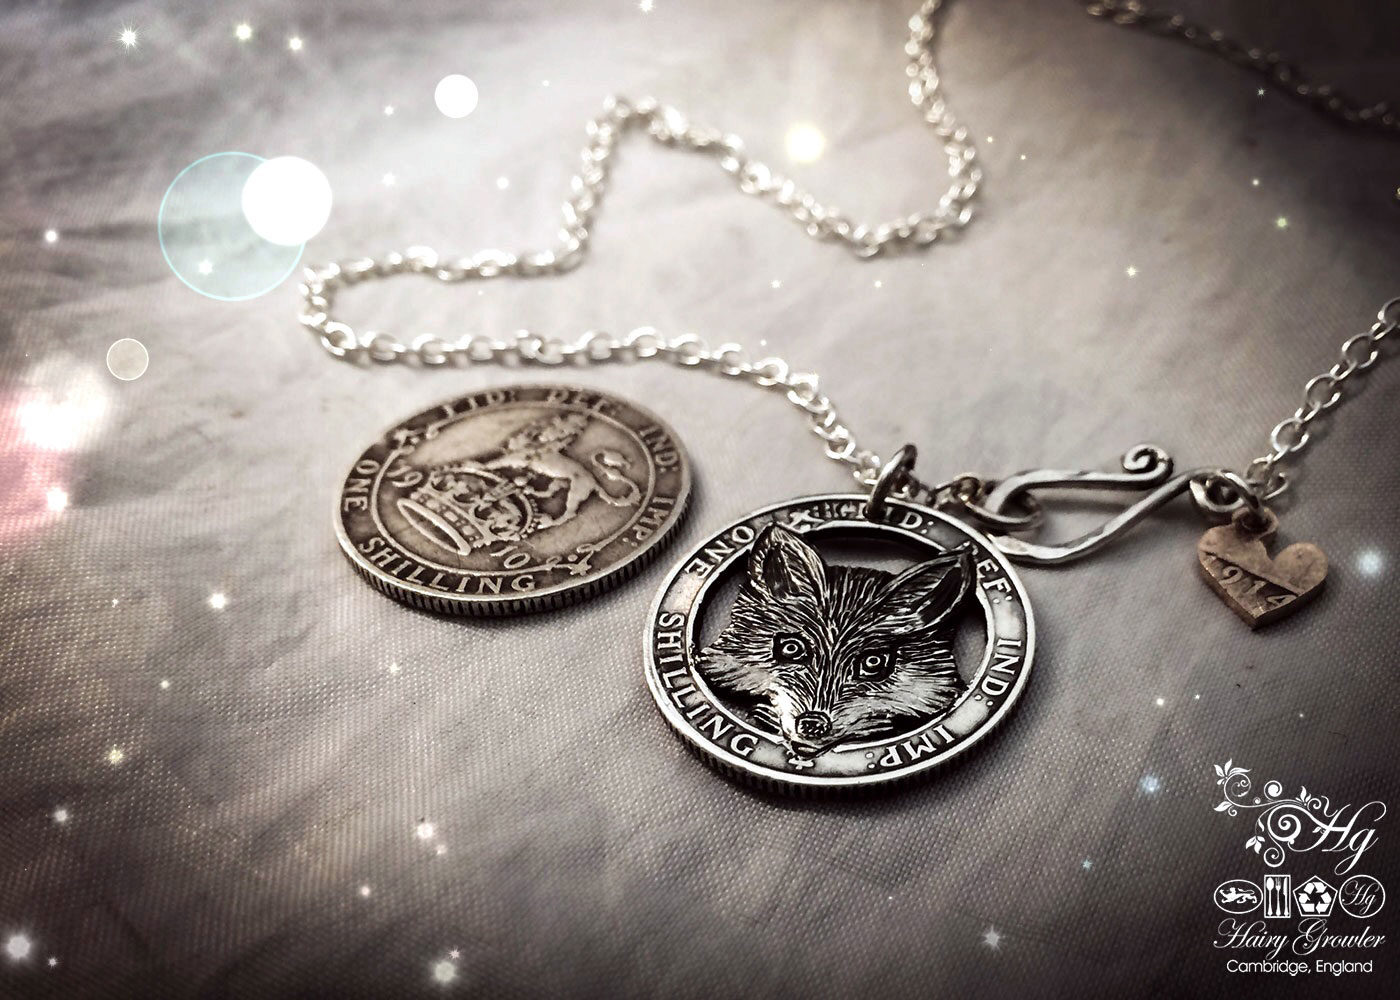 Hand crafted and upcycled silver shilling The Silver Shilling collection. silver fox necklace totally handcrafted and recycled from old sterling silver shilling coins. Designed and created by Hairy Growler Jewellery, Cambridge, UK. necklace